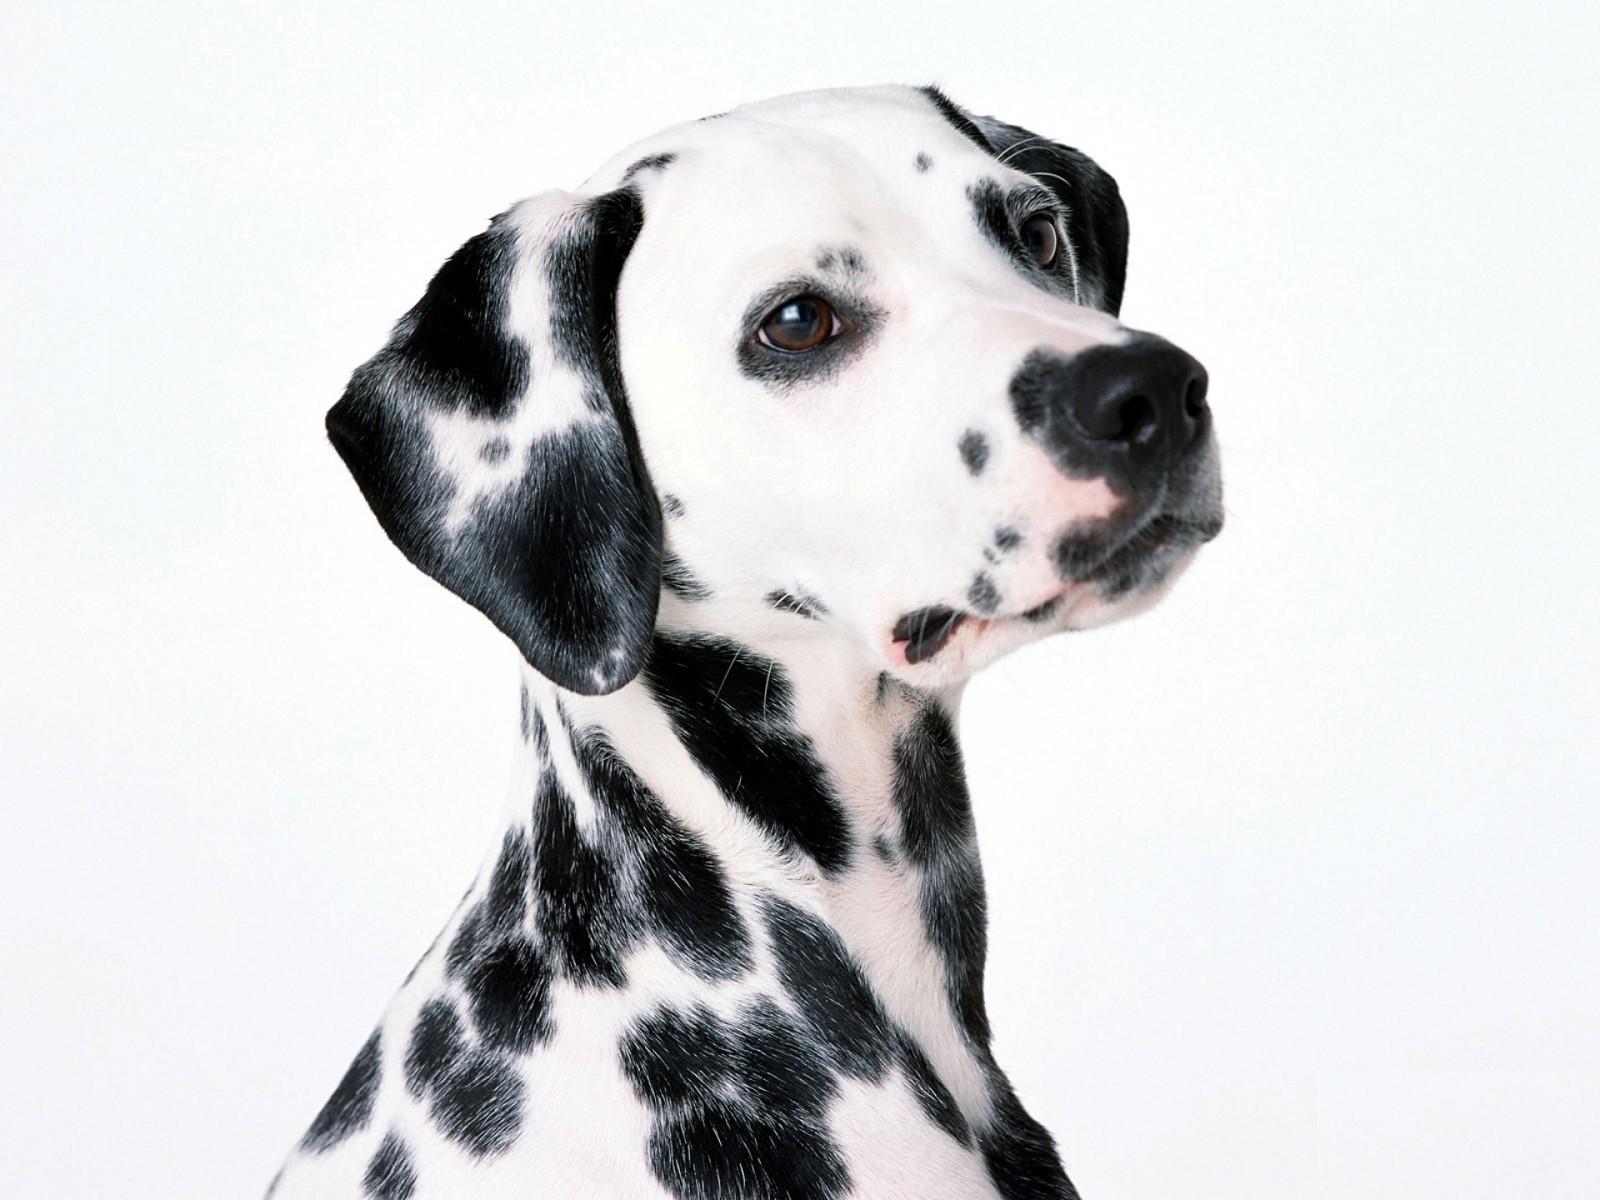 Why choose a Dalmatian to be 